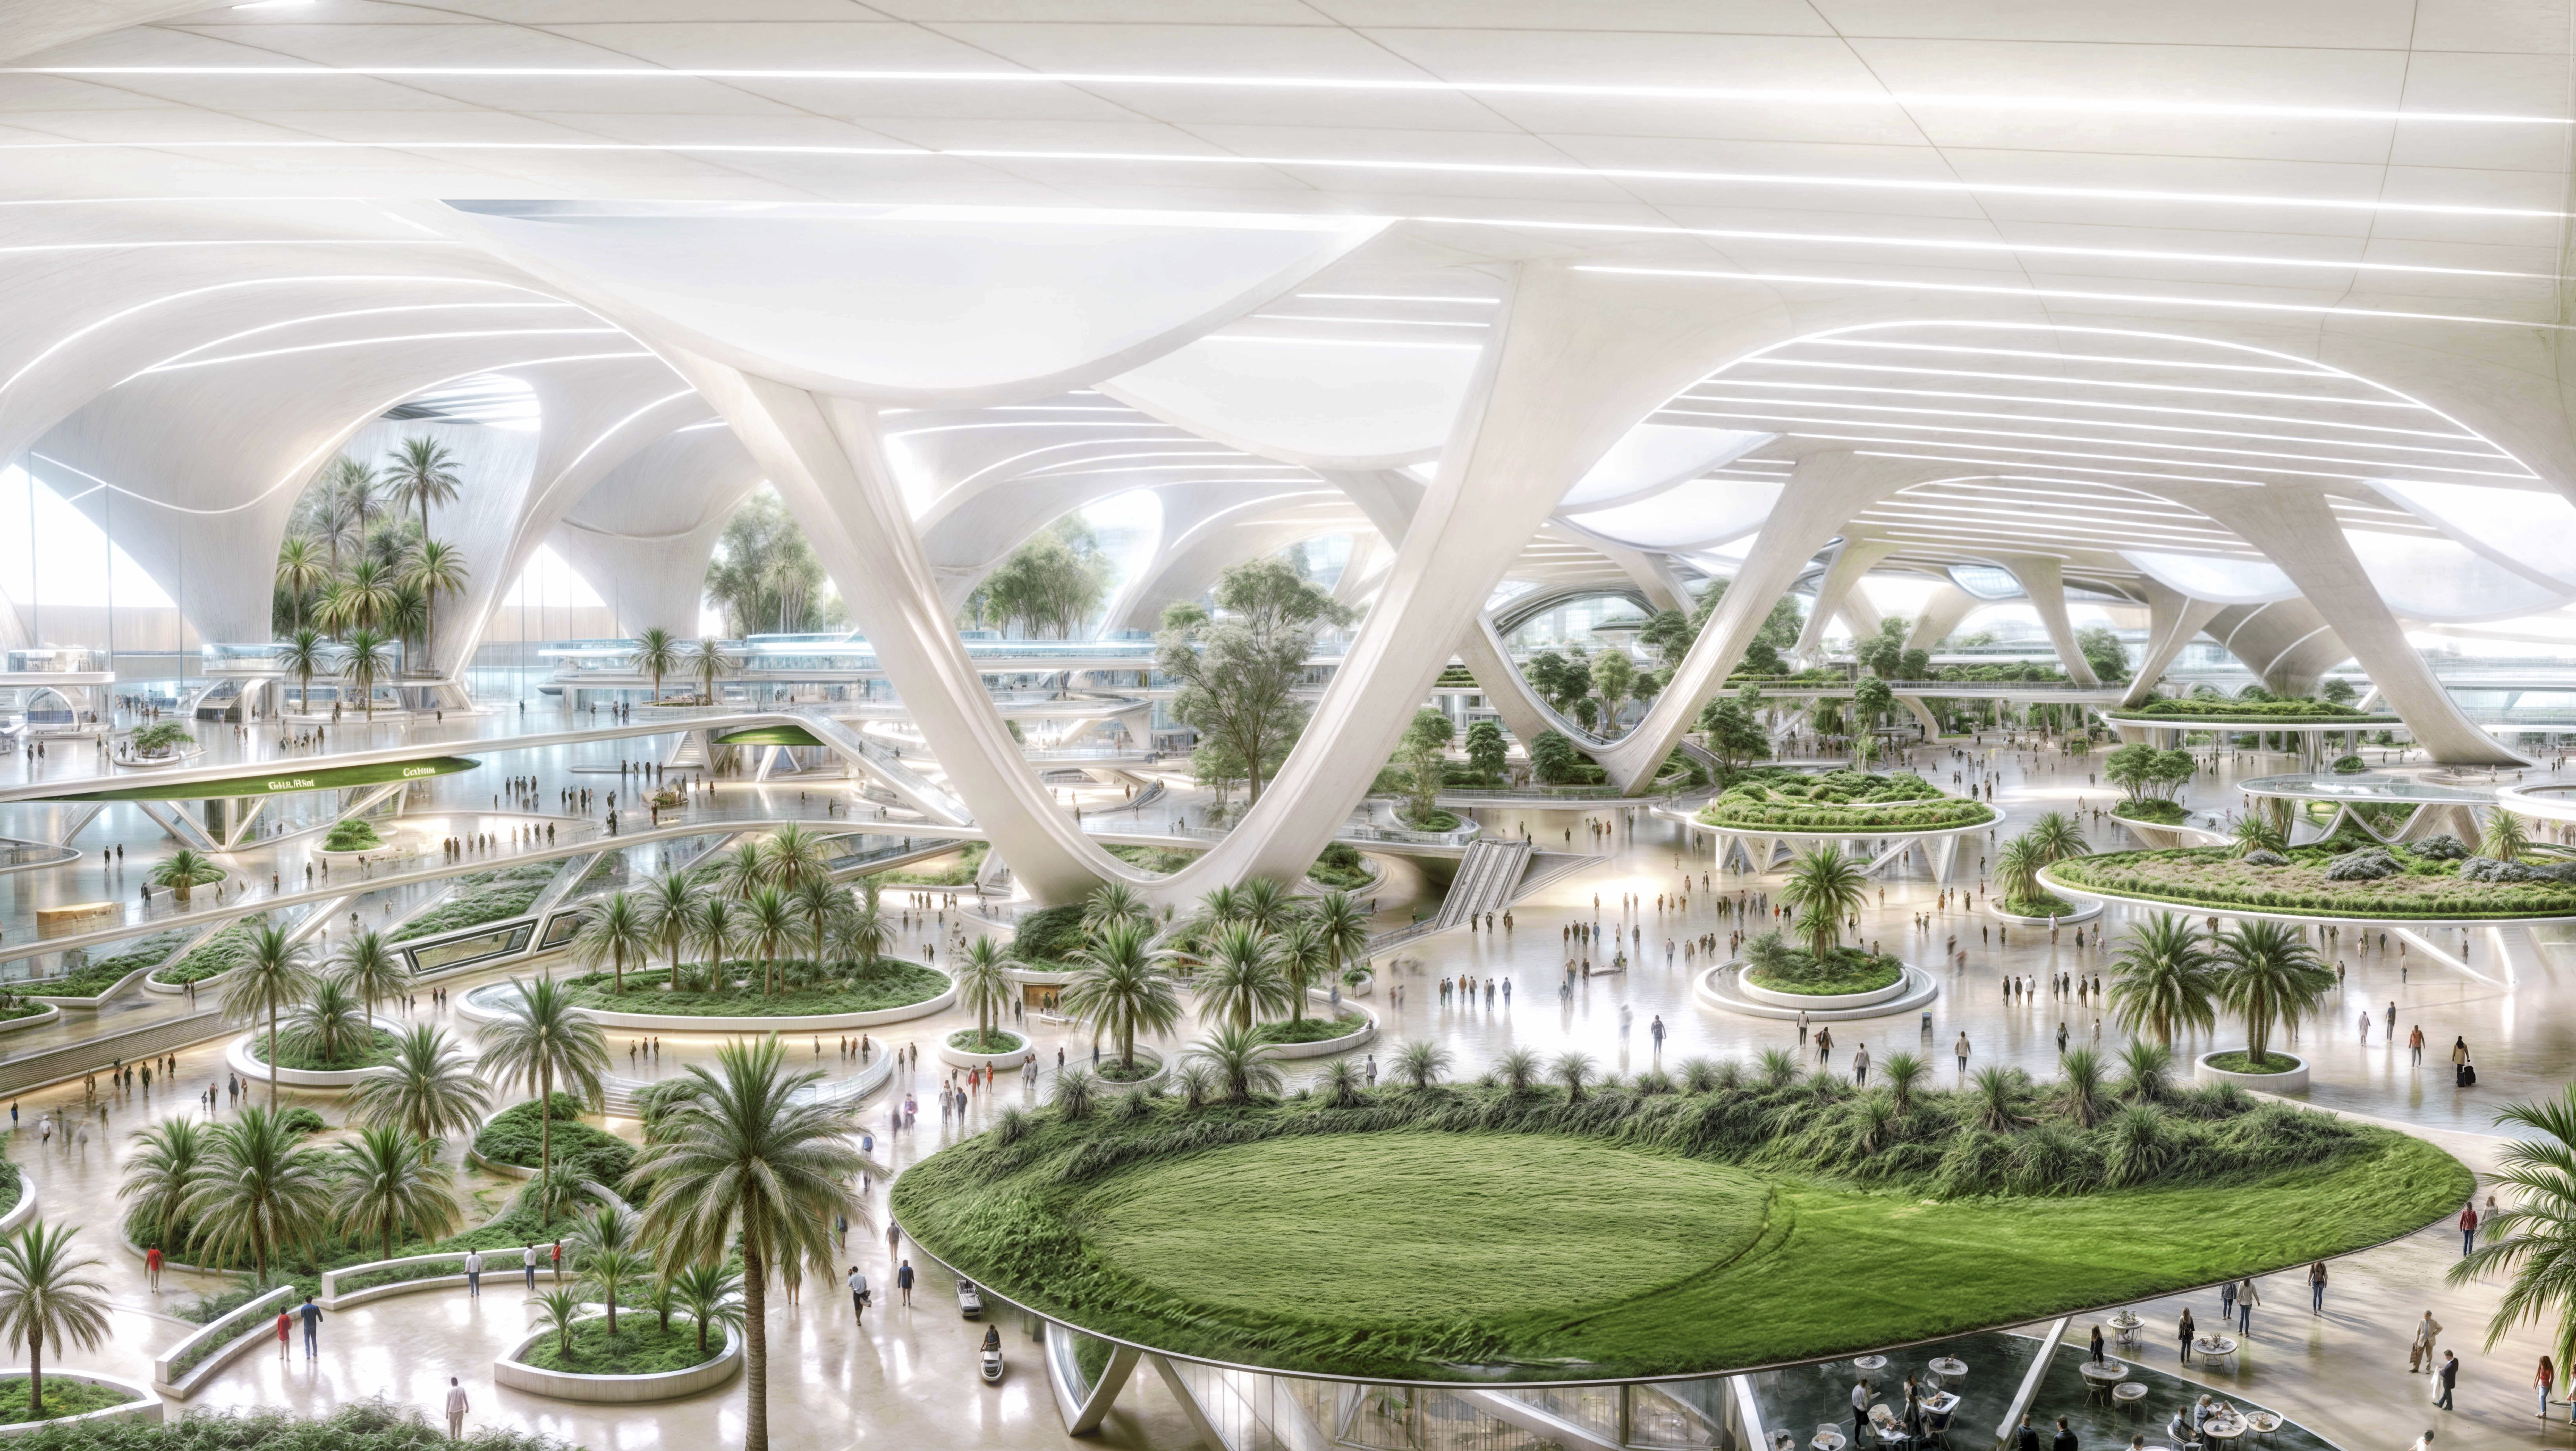 An artist’s impression of how the inside of the redeveloped Al Maktoum International Airport in Dubai will look (Dubai government/AP)